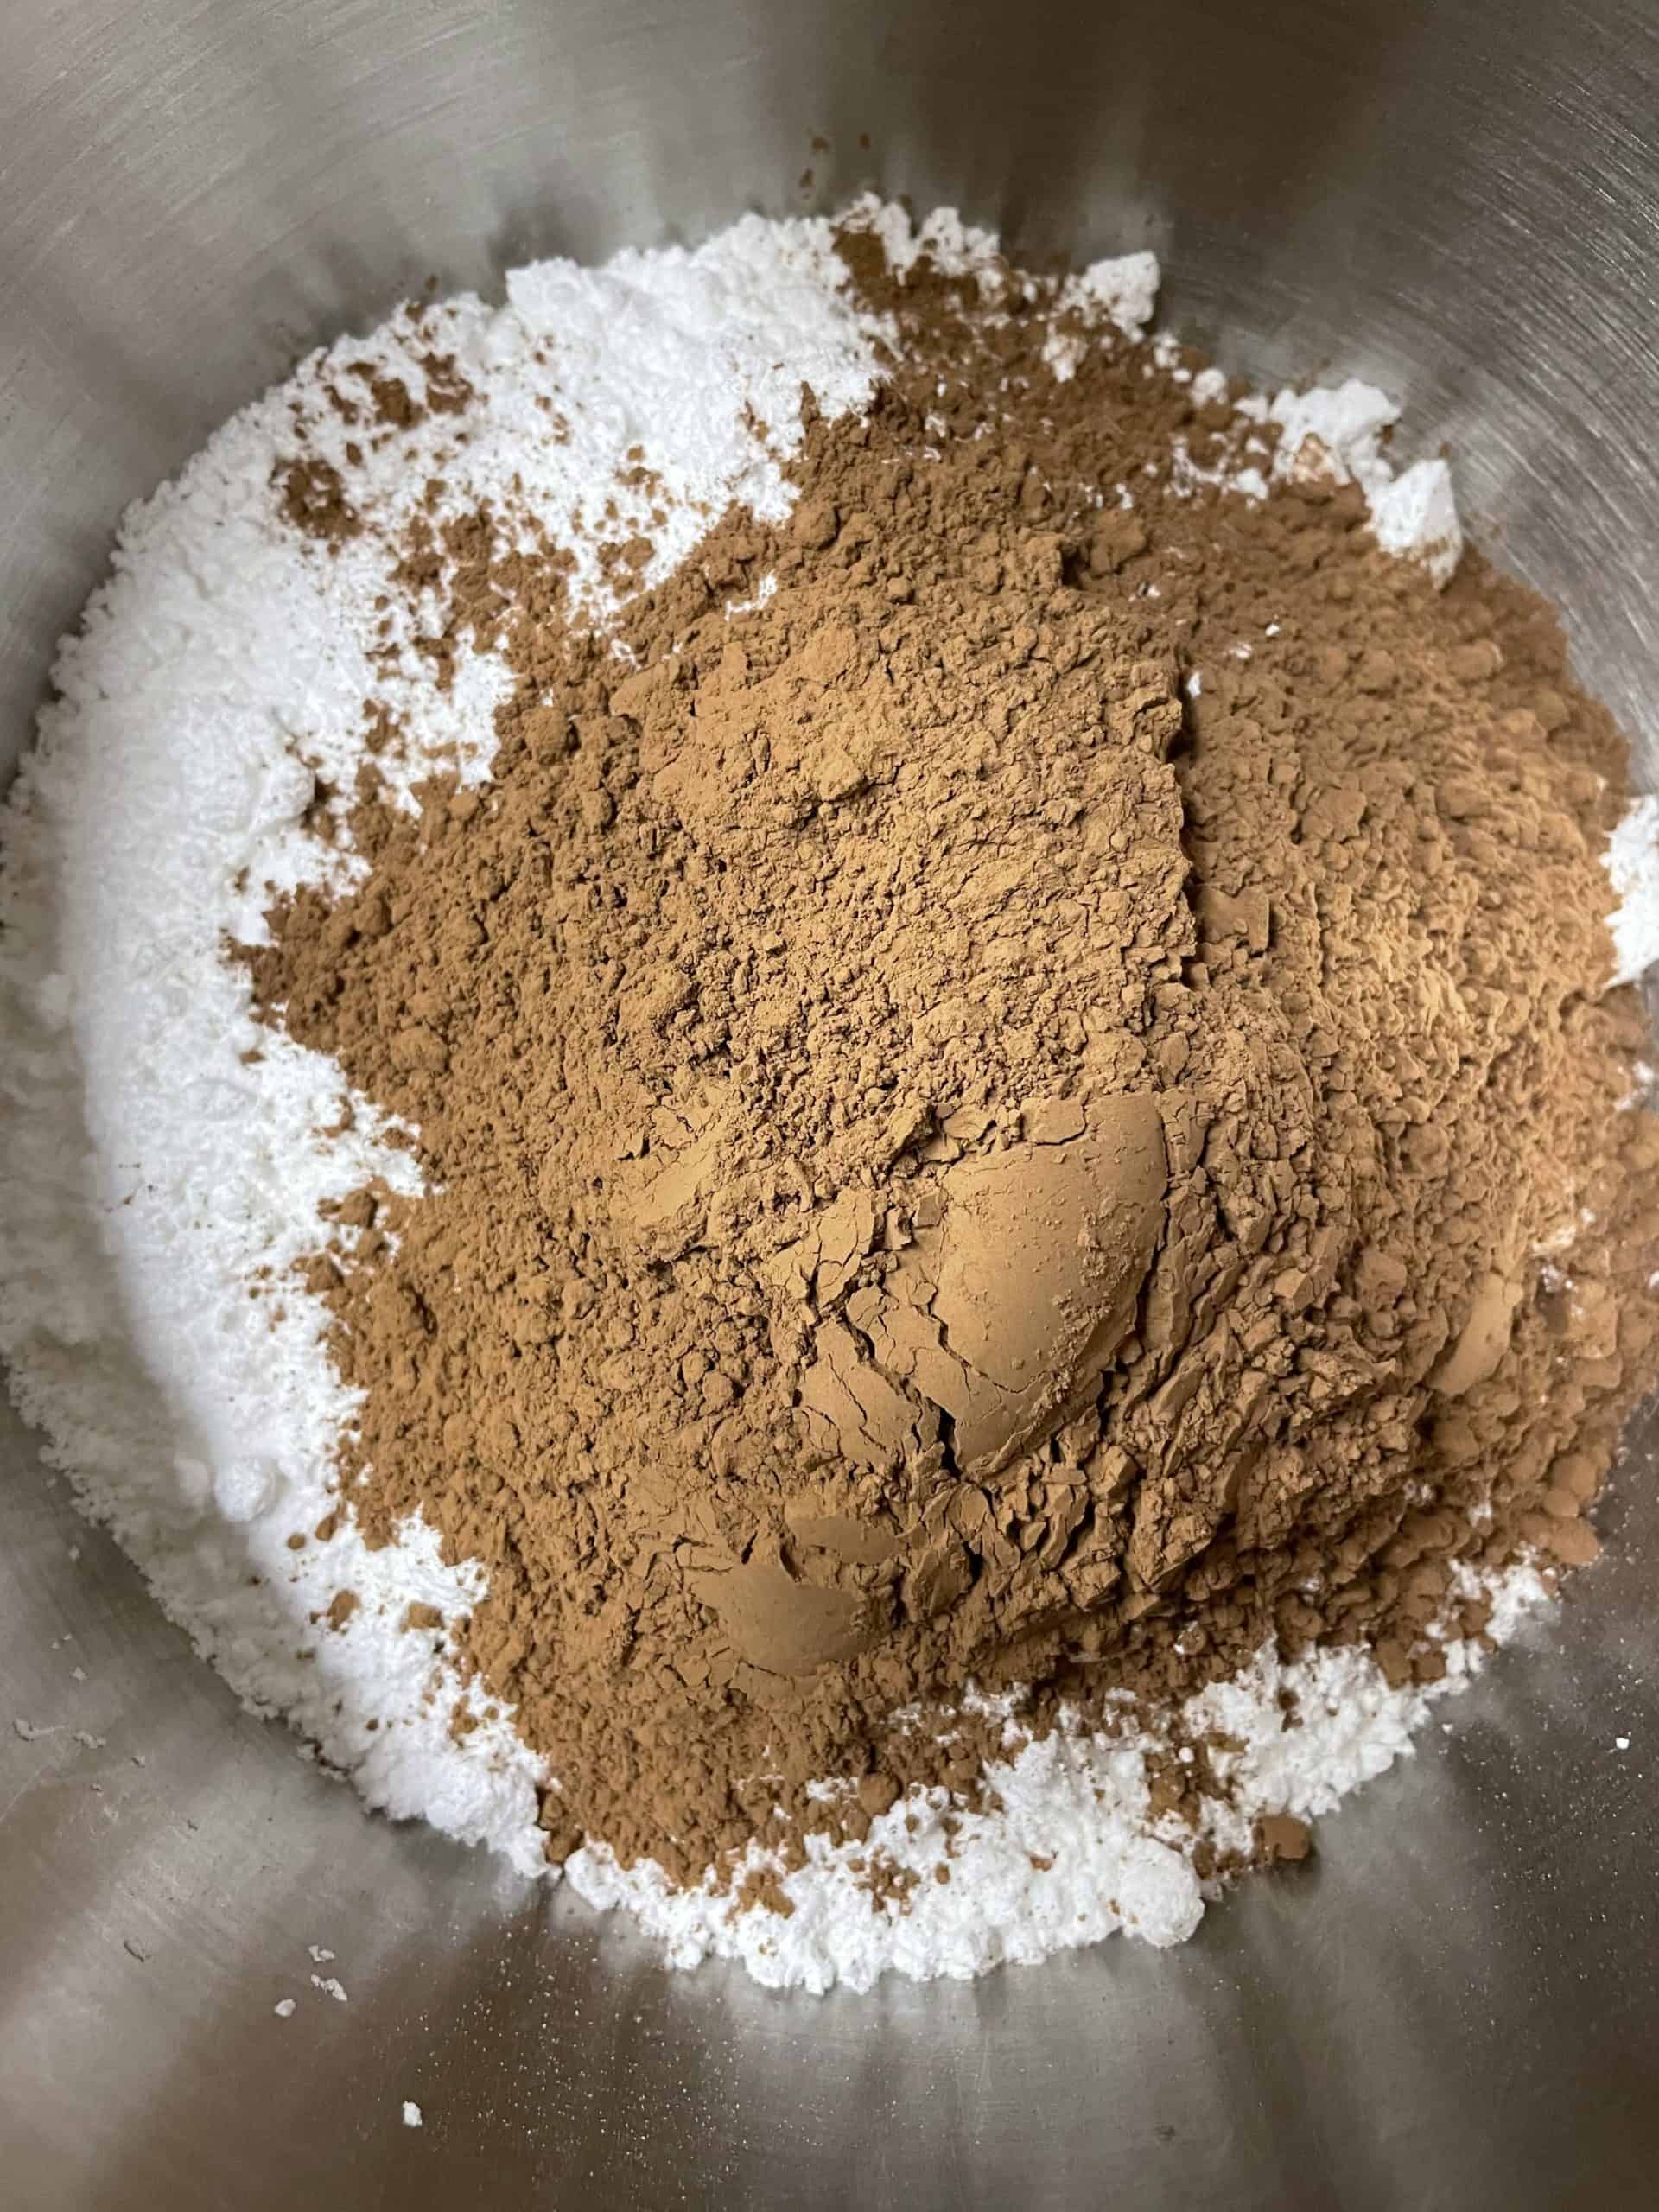 Powdered sugar and cocoa powder in a mixing bowl.